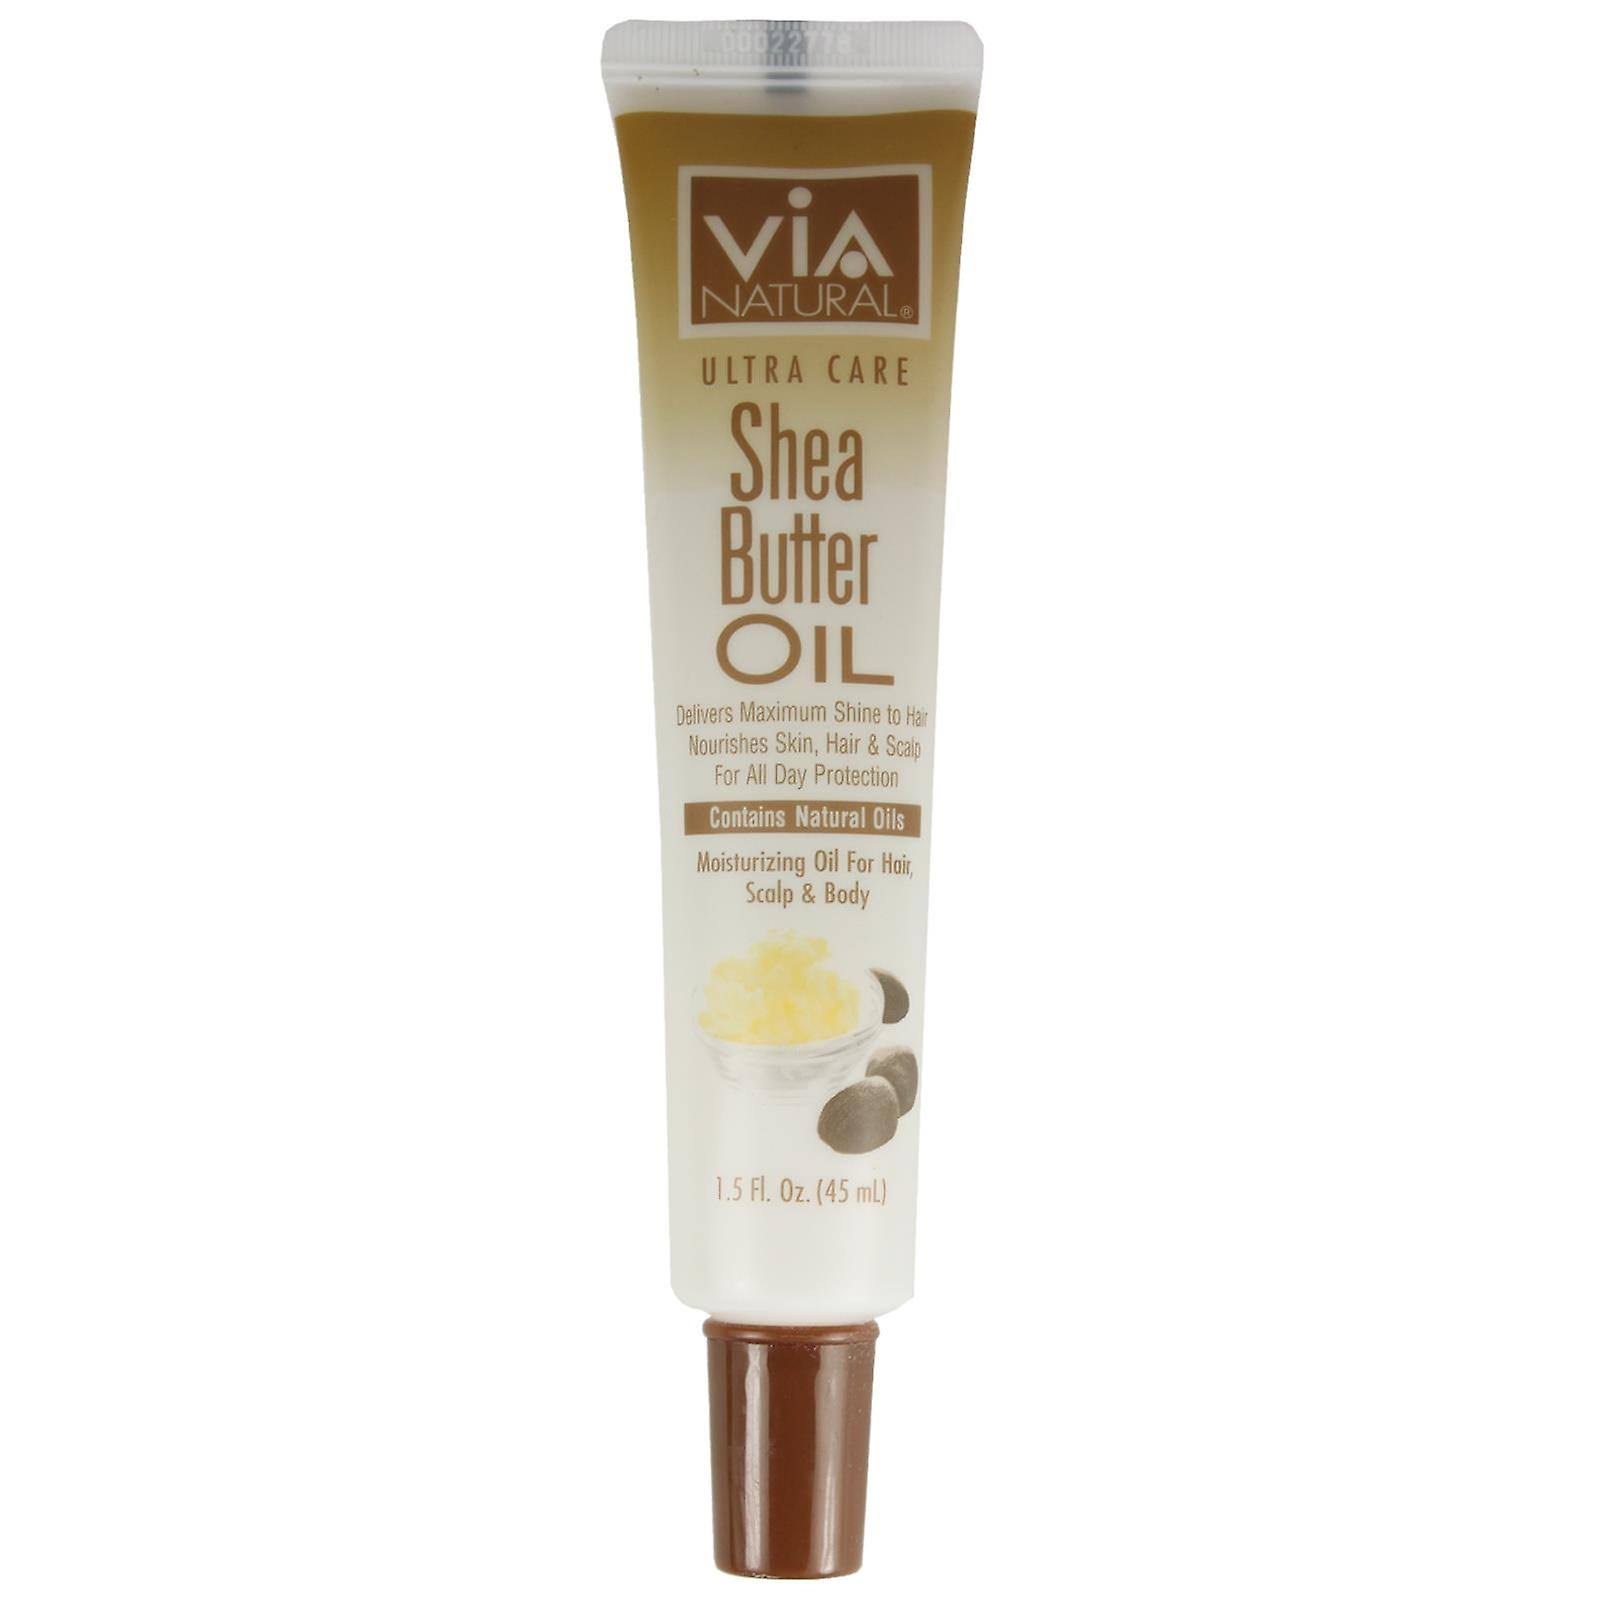 Via Natural Ultra Care Shea Butter Oil Concentrated Natural Oil - 45ml